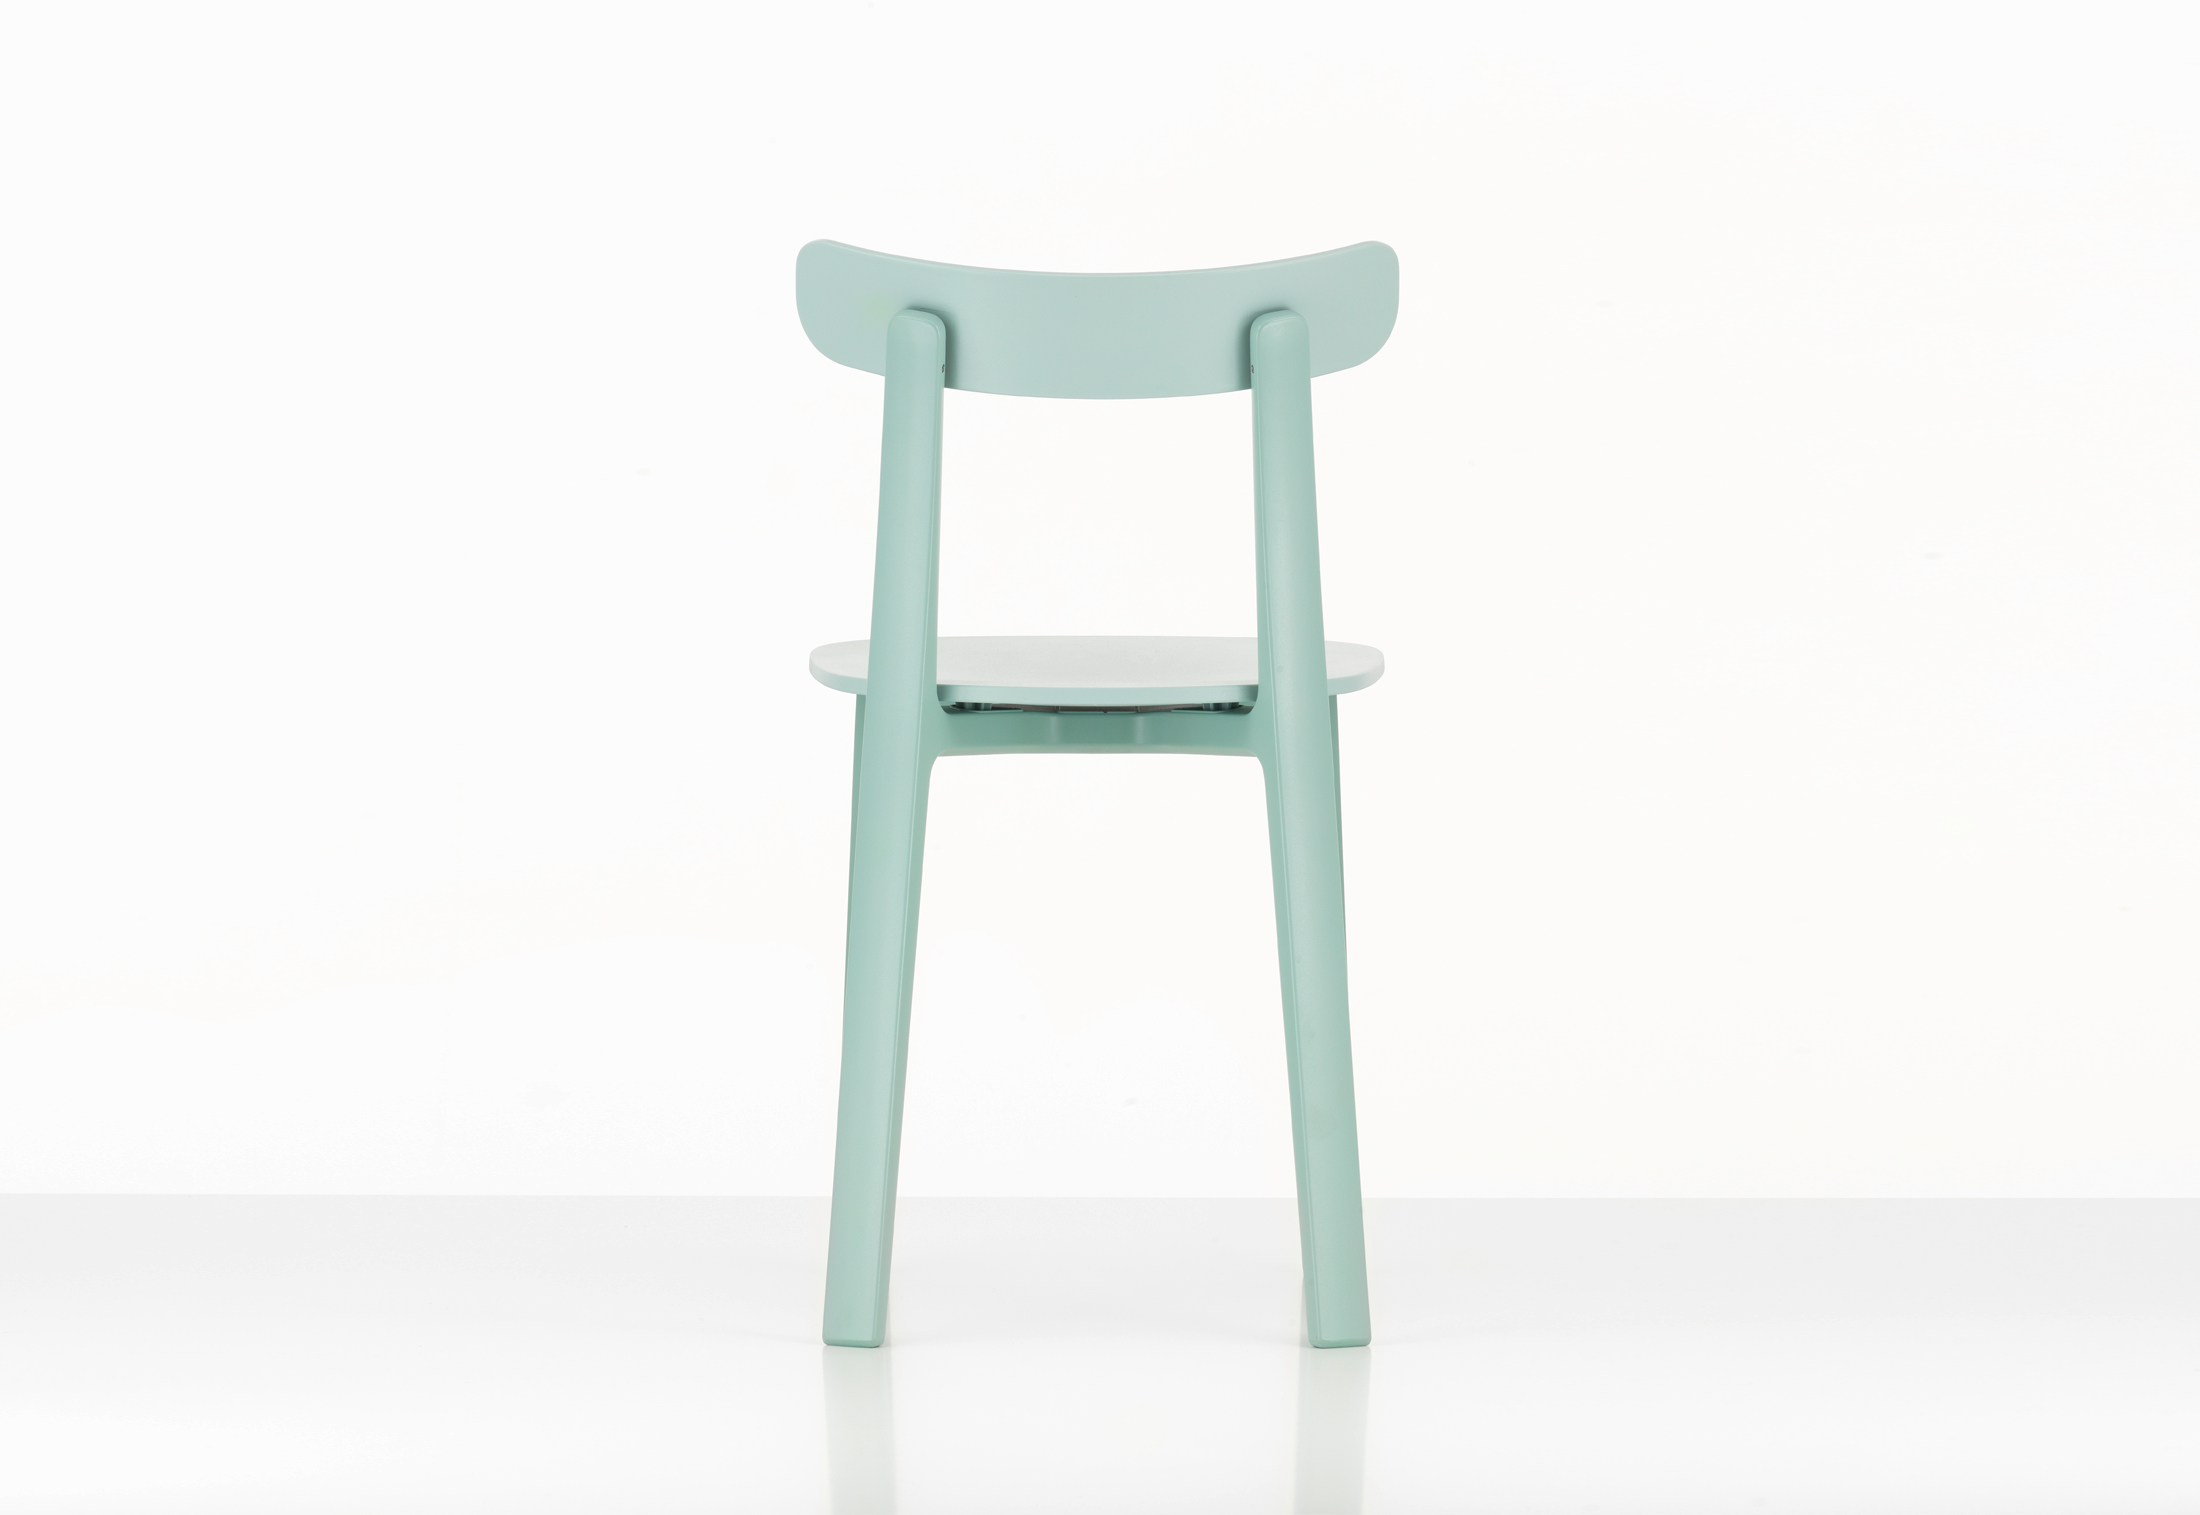 All Plastic Chairs by Jasper Morrison for Vitra